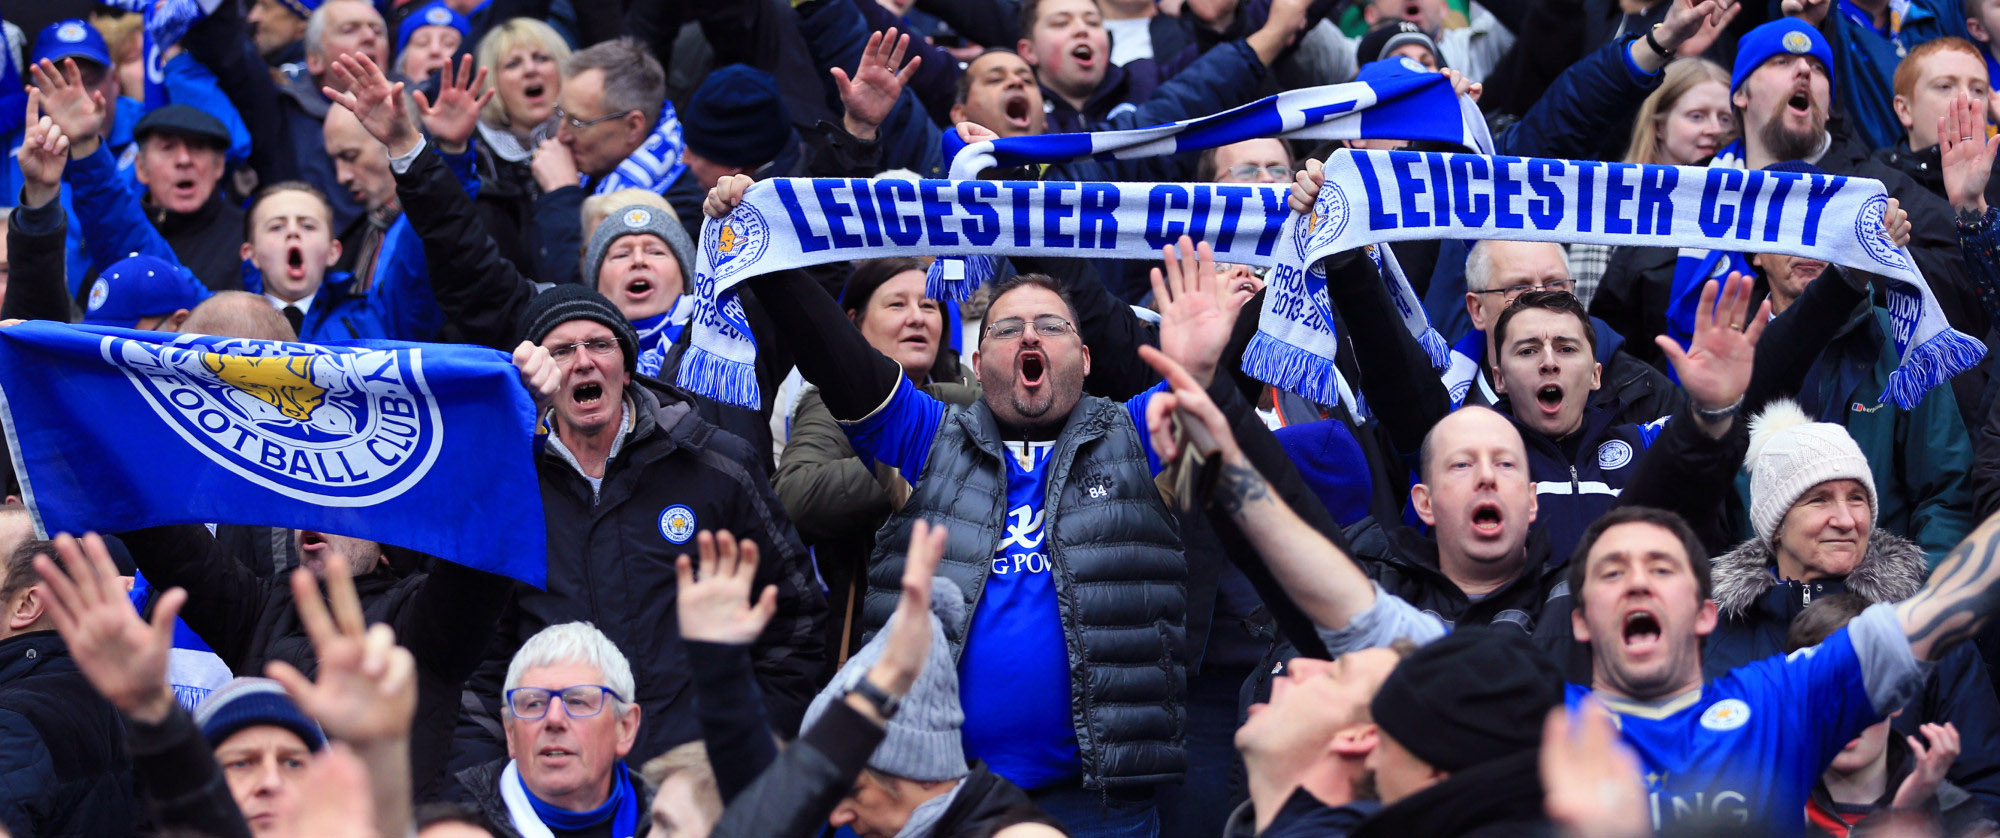 MANCHESTER, ENGLAND - FEBRUARY 06: Leicester fans celebrate during the Barclays Premier League match between Manchester City and Leicester City at the Etihad Stadium on February 6, 2016 in Manchester, England. (Photo by Simon Stacpoole/Mark Leech Sports Photography/Getty Images)